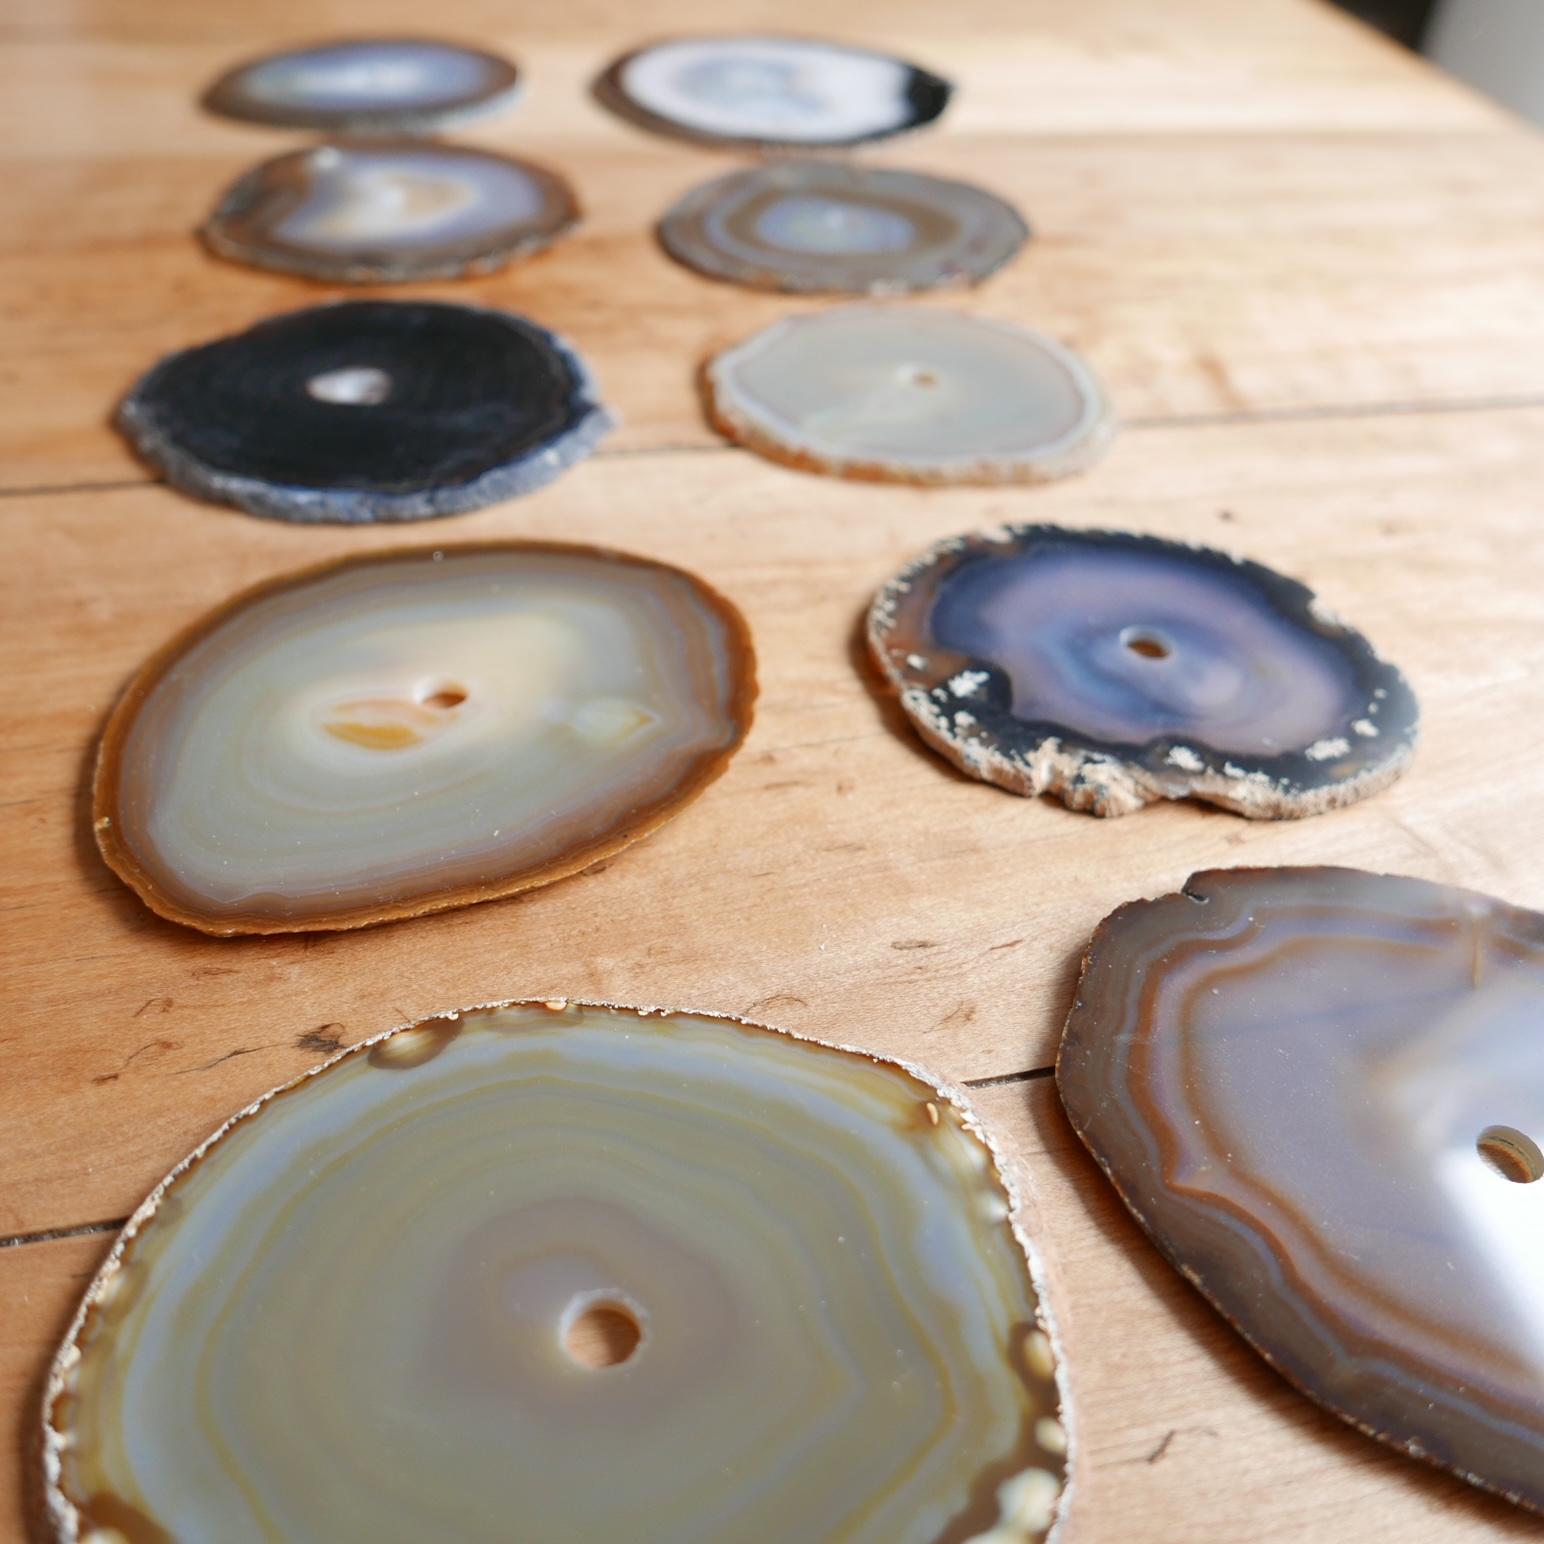 A set of natural stone circular drink place mats or coasters. Likely Agates.

France, c1970s.

A variety of colours and stone specimens.

All have a circular hole in the centre presumably to mount on a rod for storage. But said rod is